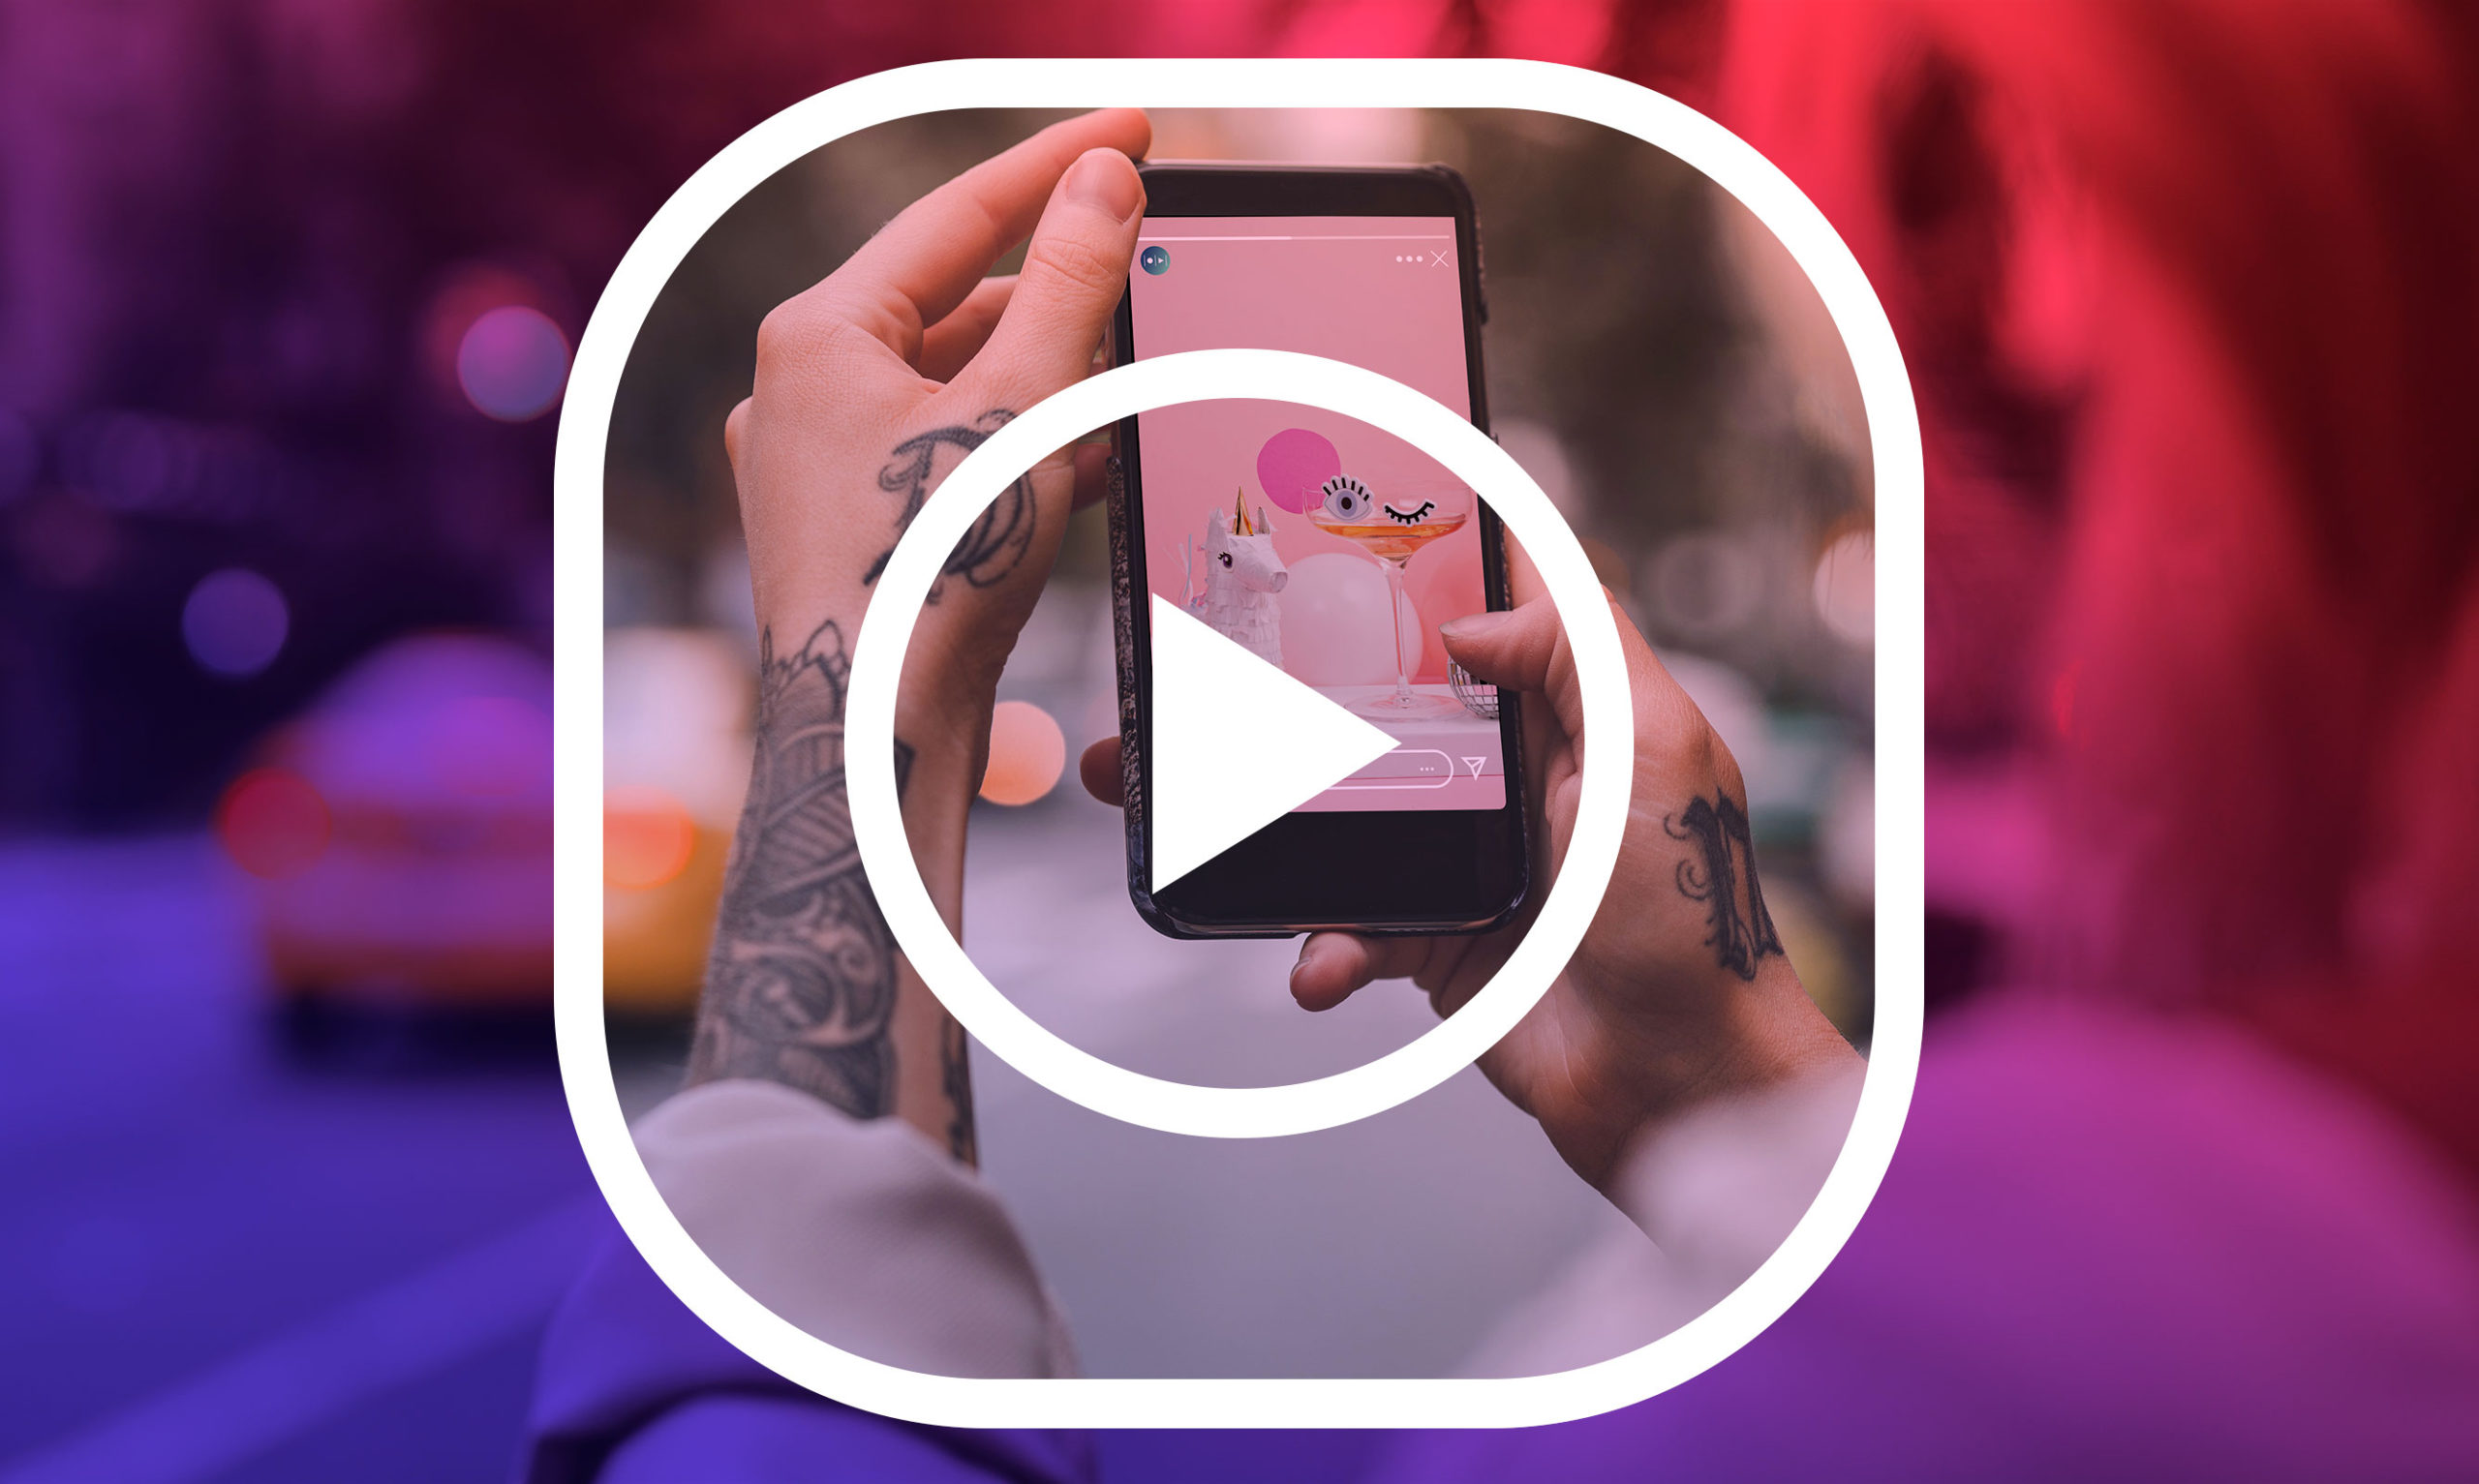 The Ultimate Guide To Getting More Views on Your Instagram Stories